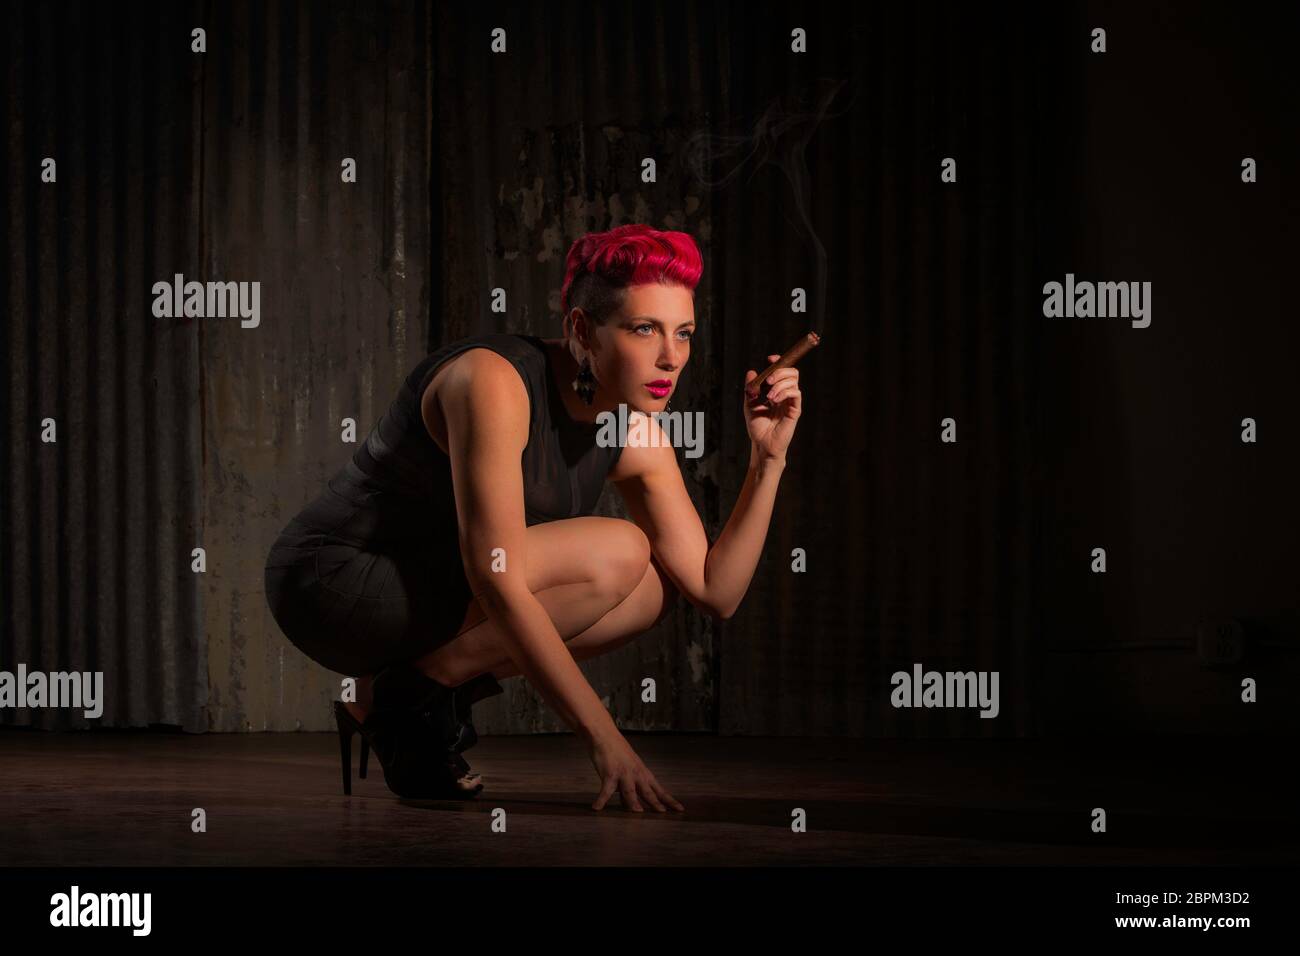 Sultry woman with fuschia hair crouching and holding a cigar Stock Photo